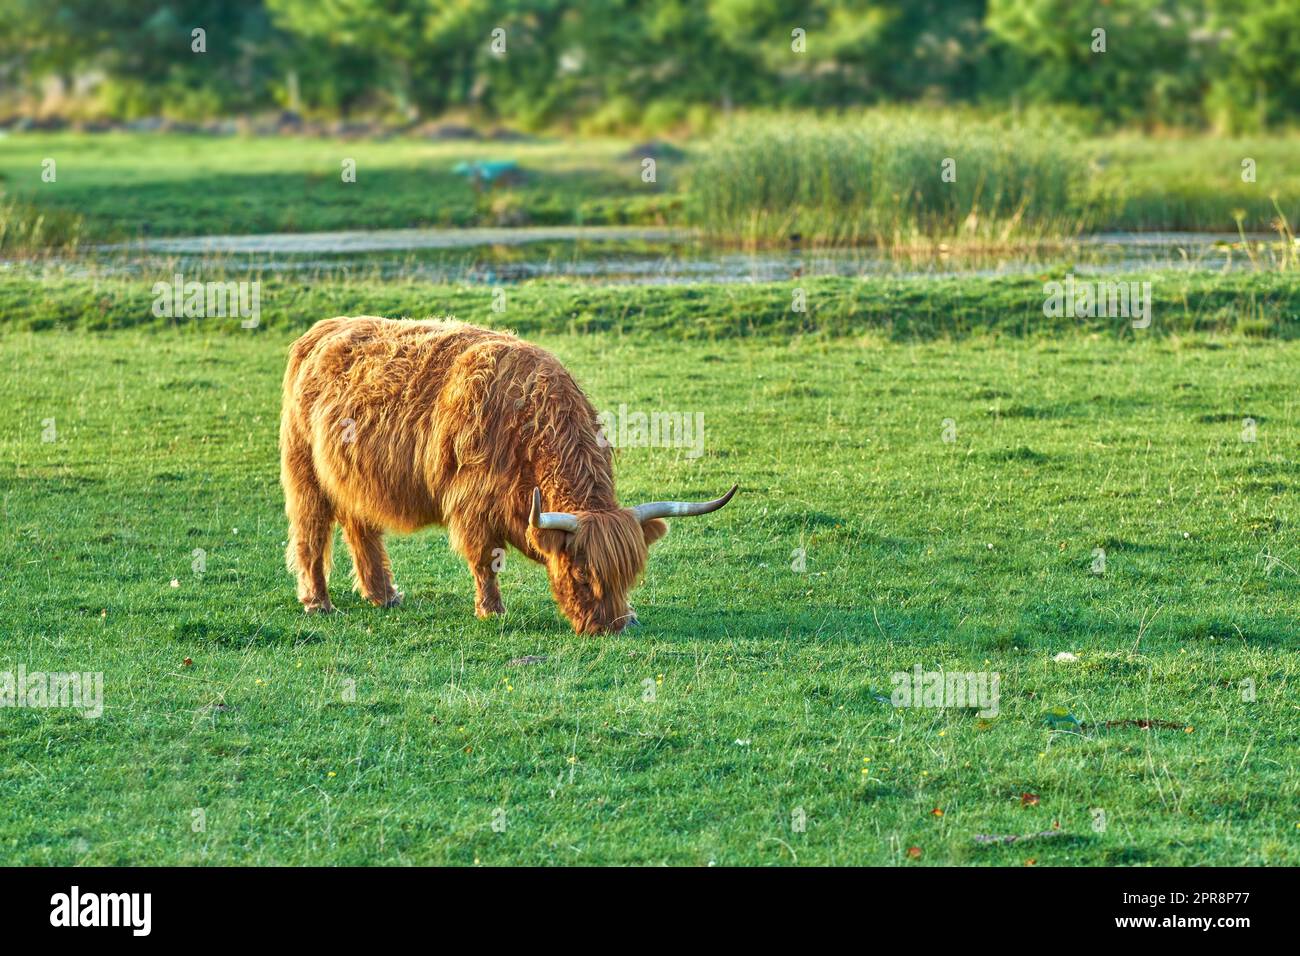 Grass fed Highland cow grazing on green farm pasture and raised for dairy, meat or beef industry. Full length of a hairy cattle animal standing alone on lawn on remote farmland or agriculture estate Stock Photo